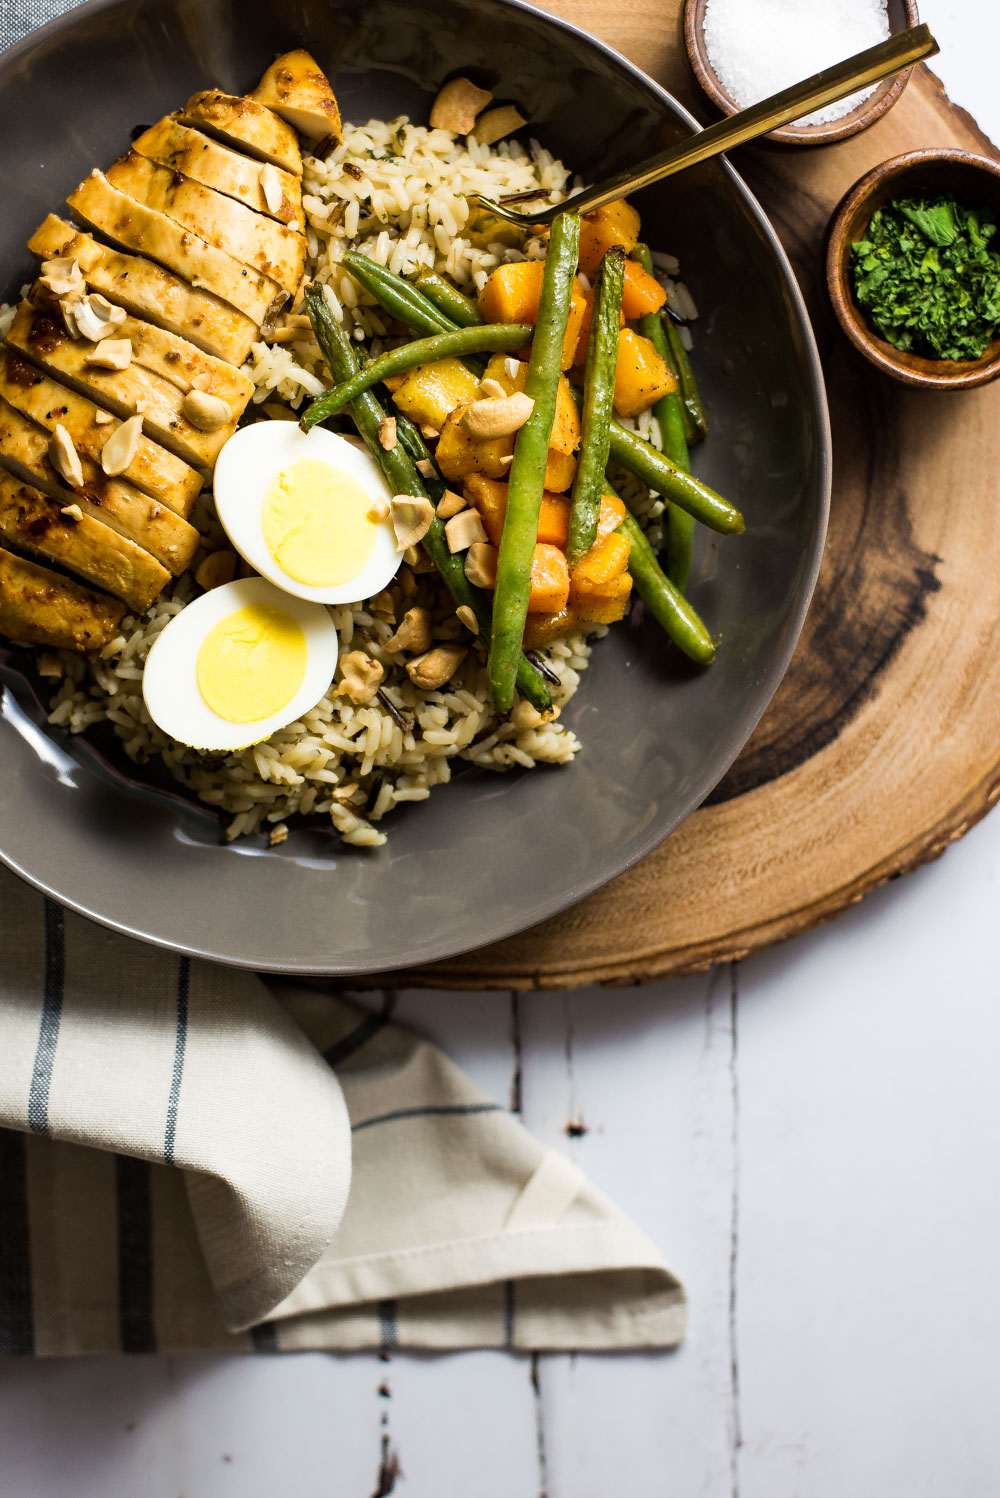 Brown Butter rice bowls with marinated chicken breast and roasted veggies is the perfect family-friendly weeknight meal that's loaded with nutritious deliciousness!